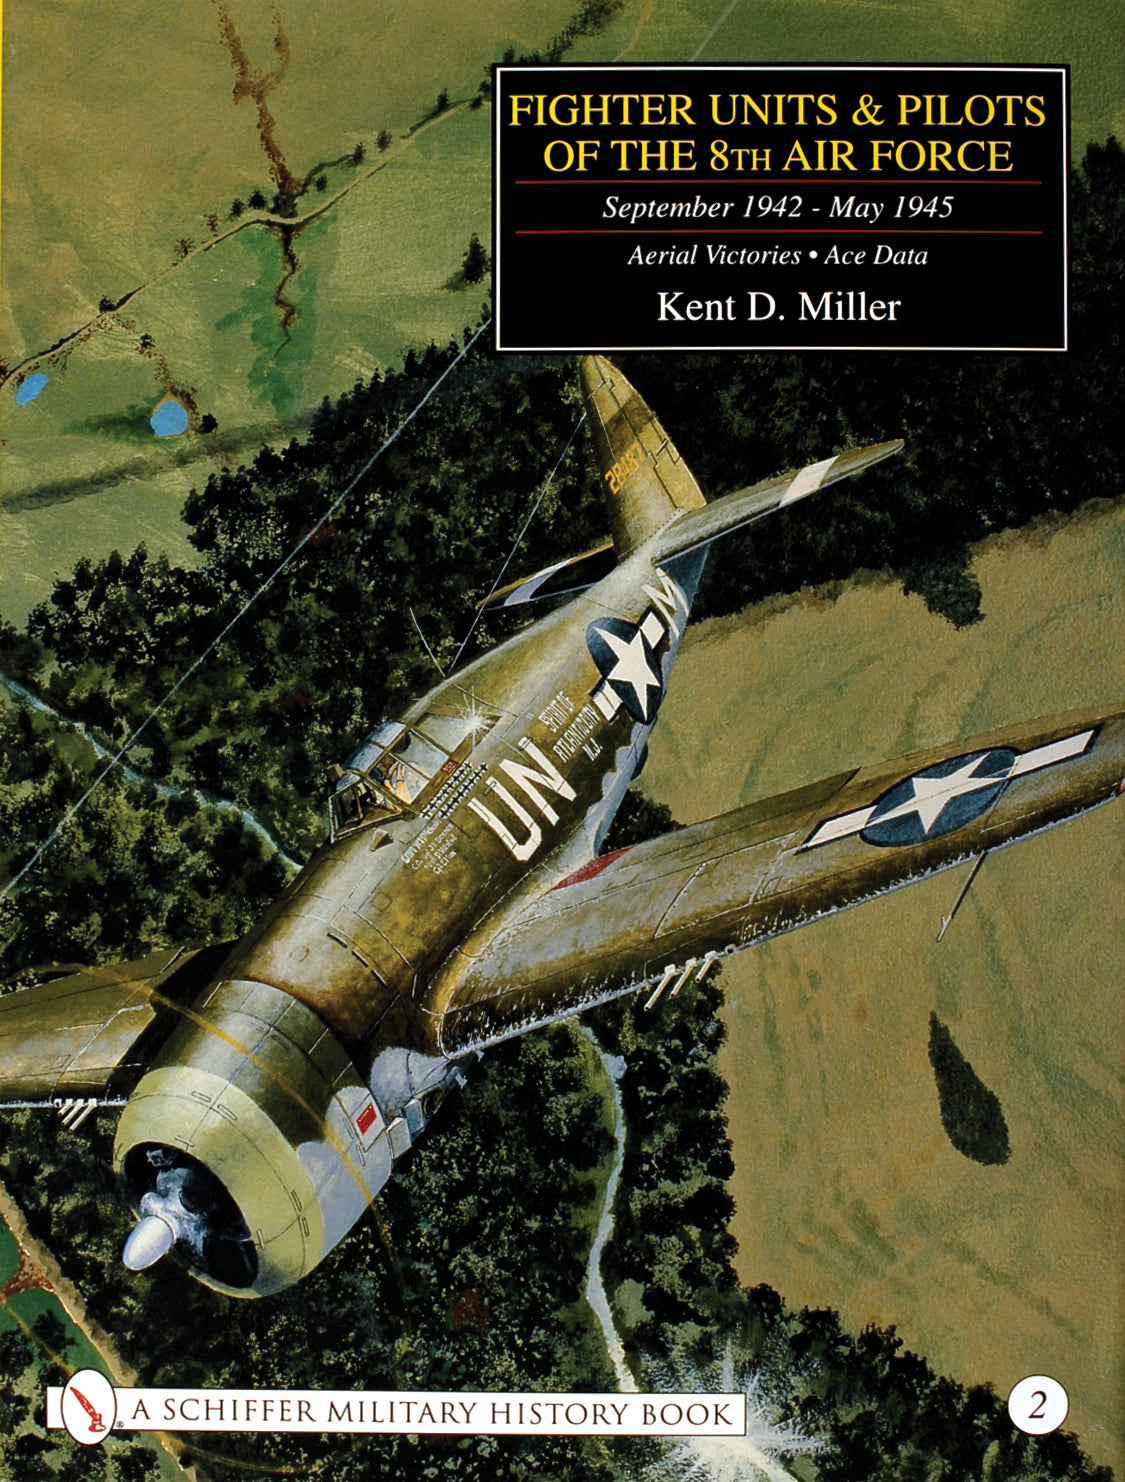 Fighter Units & Pilots of the 8th Air Force September 1942 - May 1945 Vol. 2